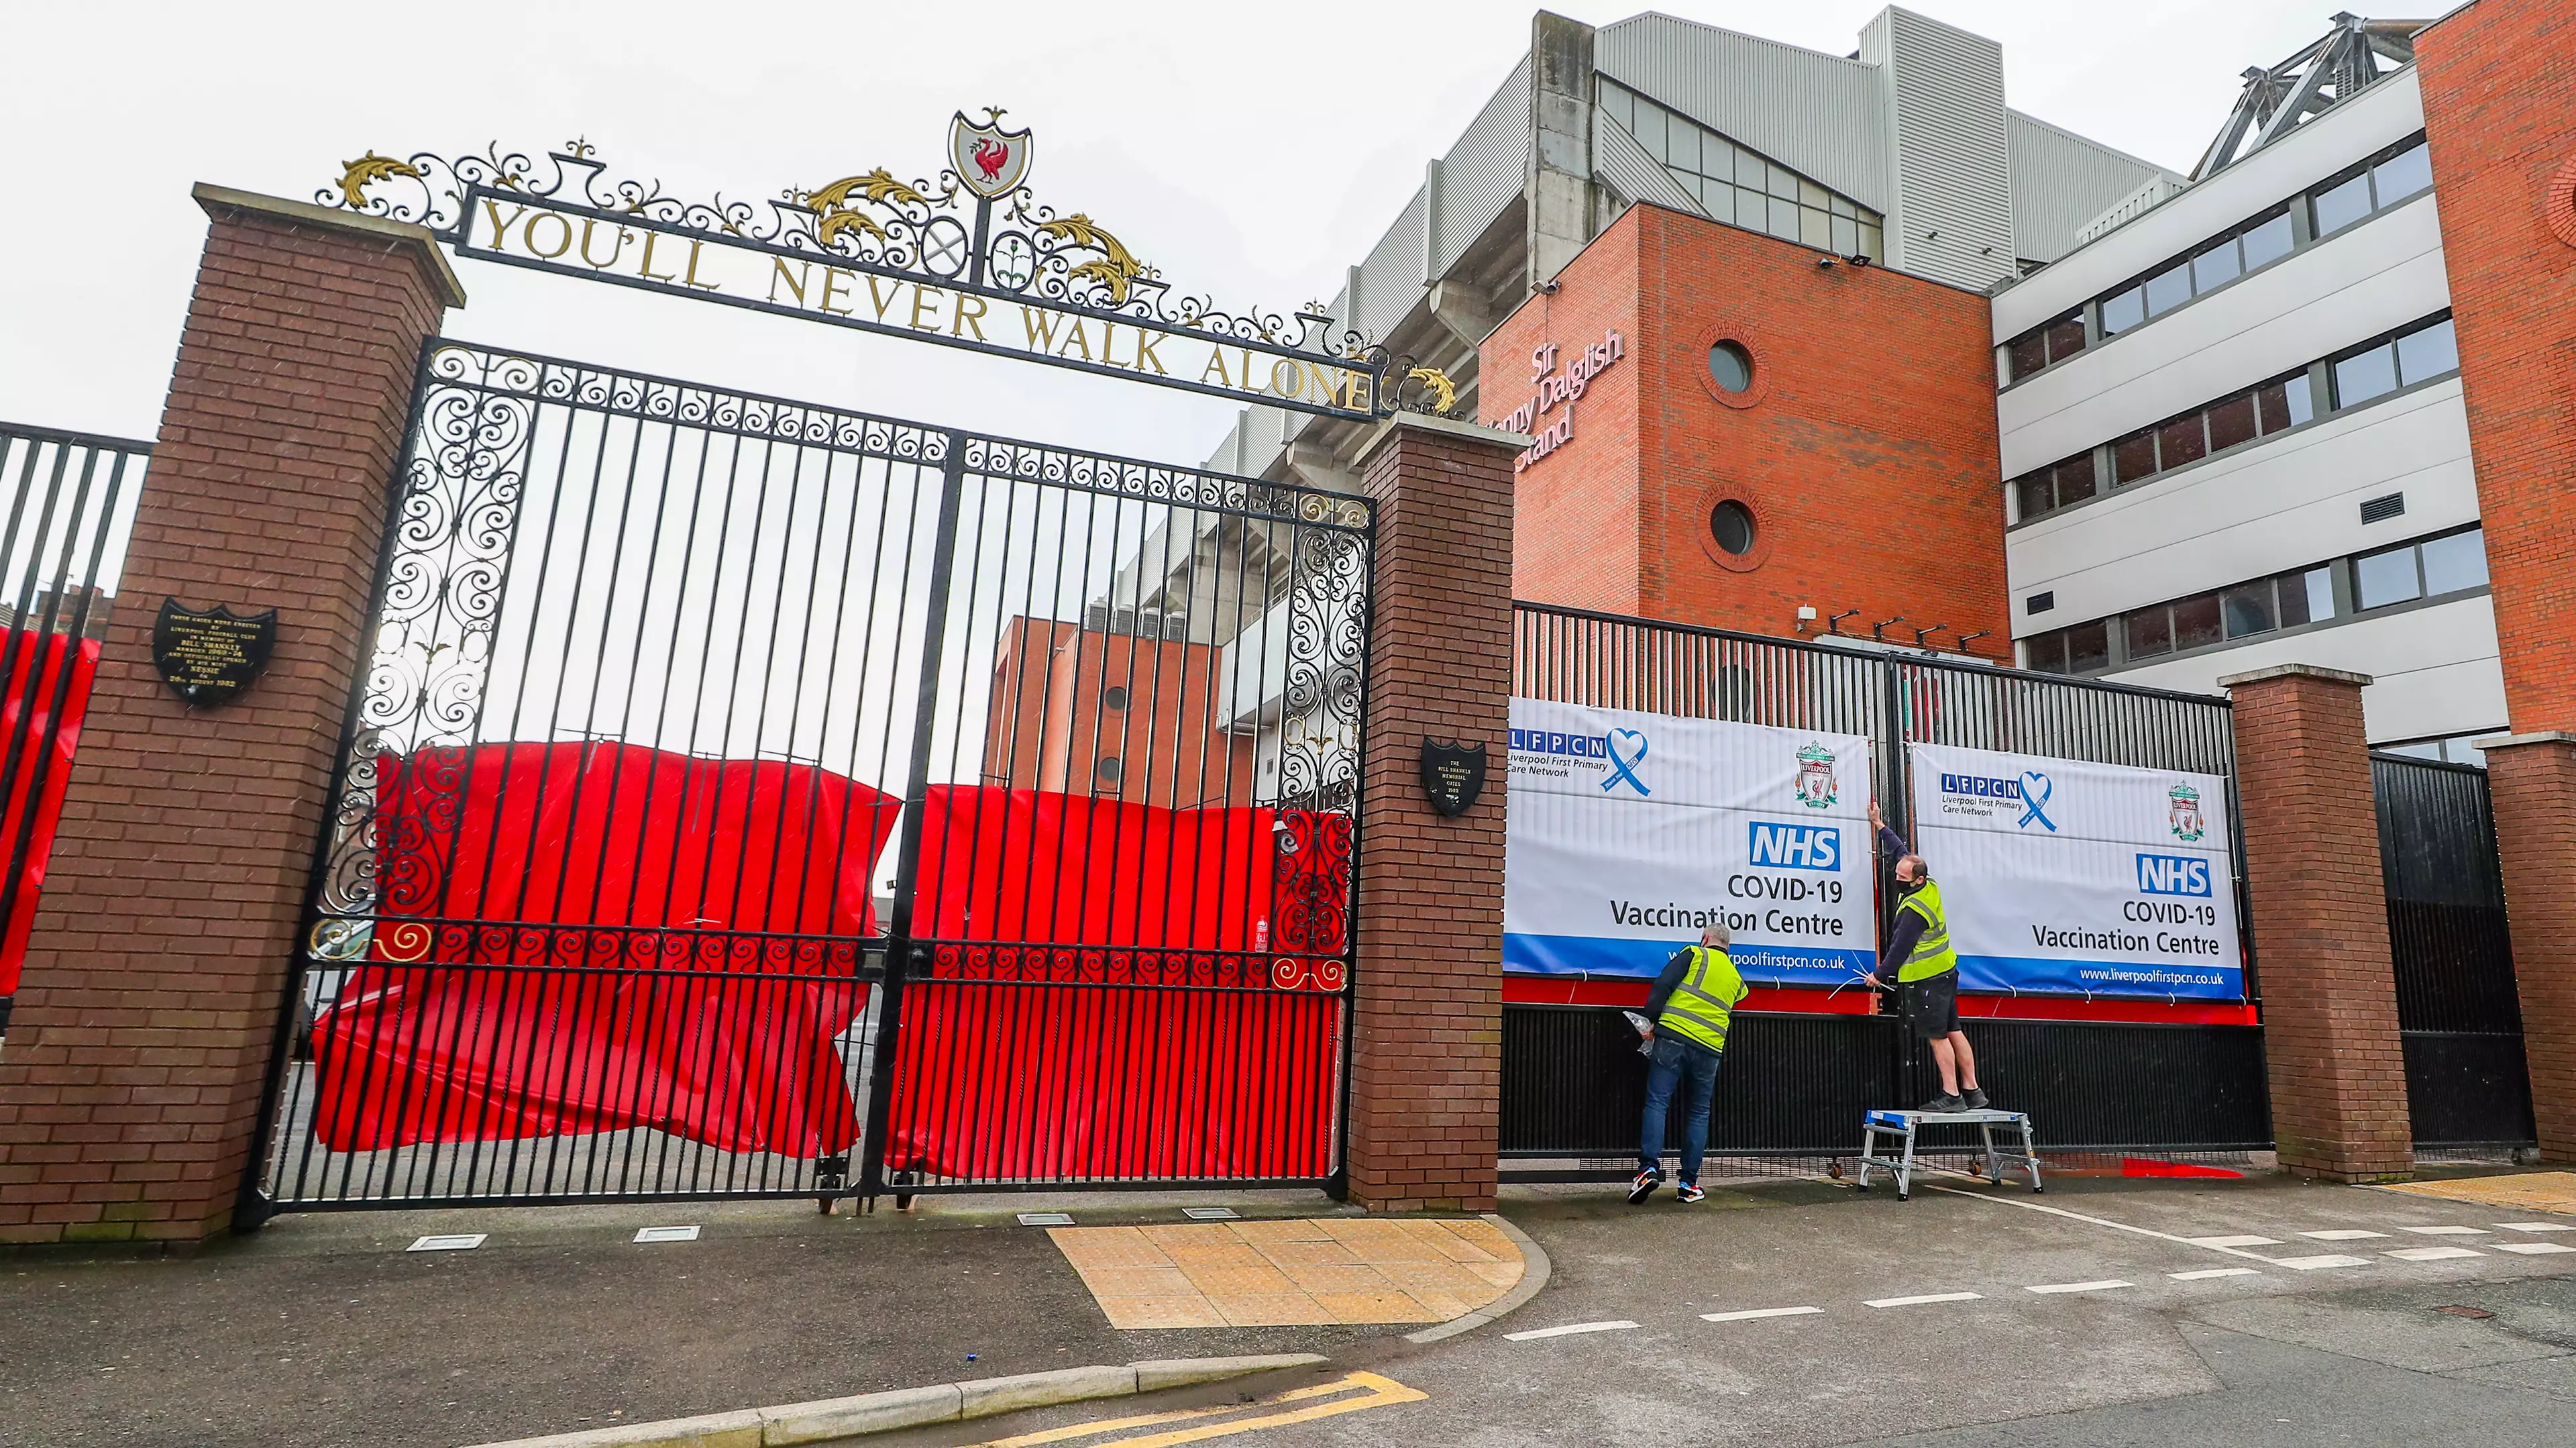 Anfield was being used as a vaccination centre. Image: PA Image